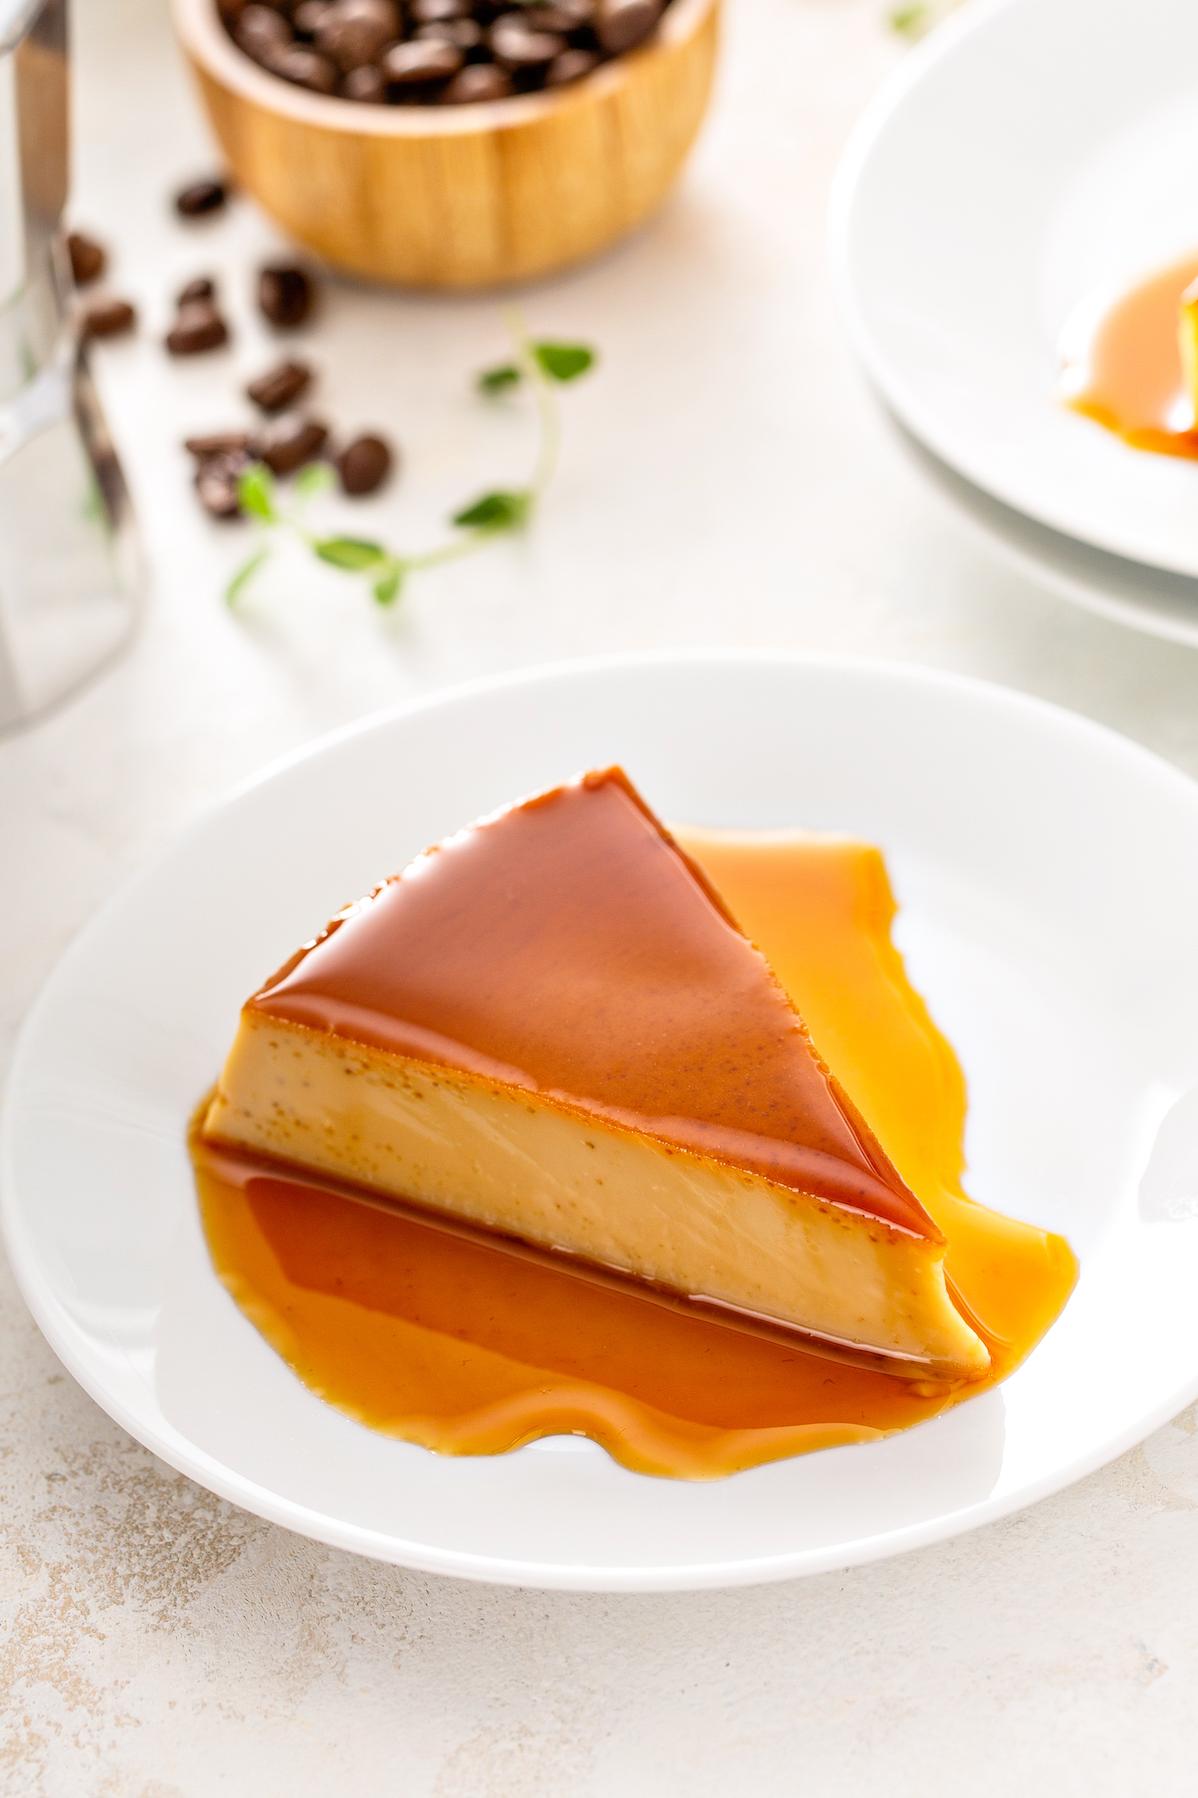  A drizzle of caramel sauce adds extra sweetness to this creamy and rich dessert.